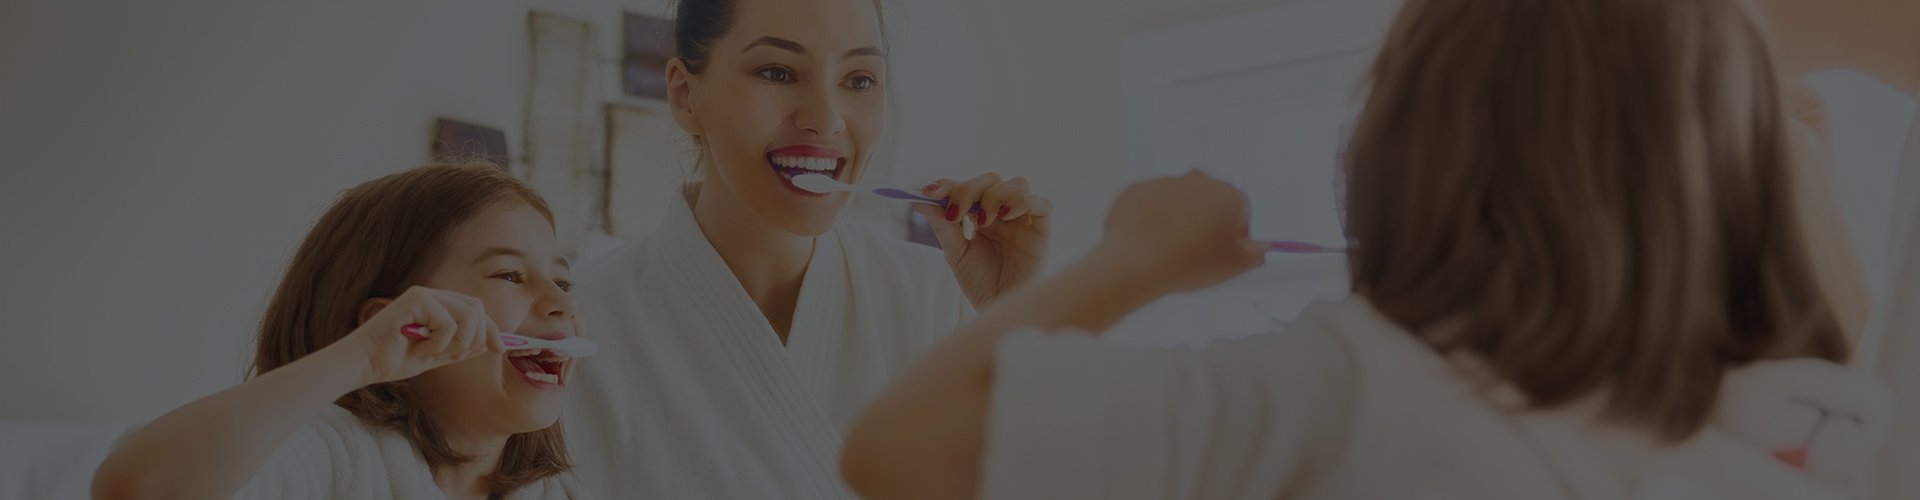 7 tips on how to take care of your teeth mum daughter brushing teeth